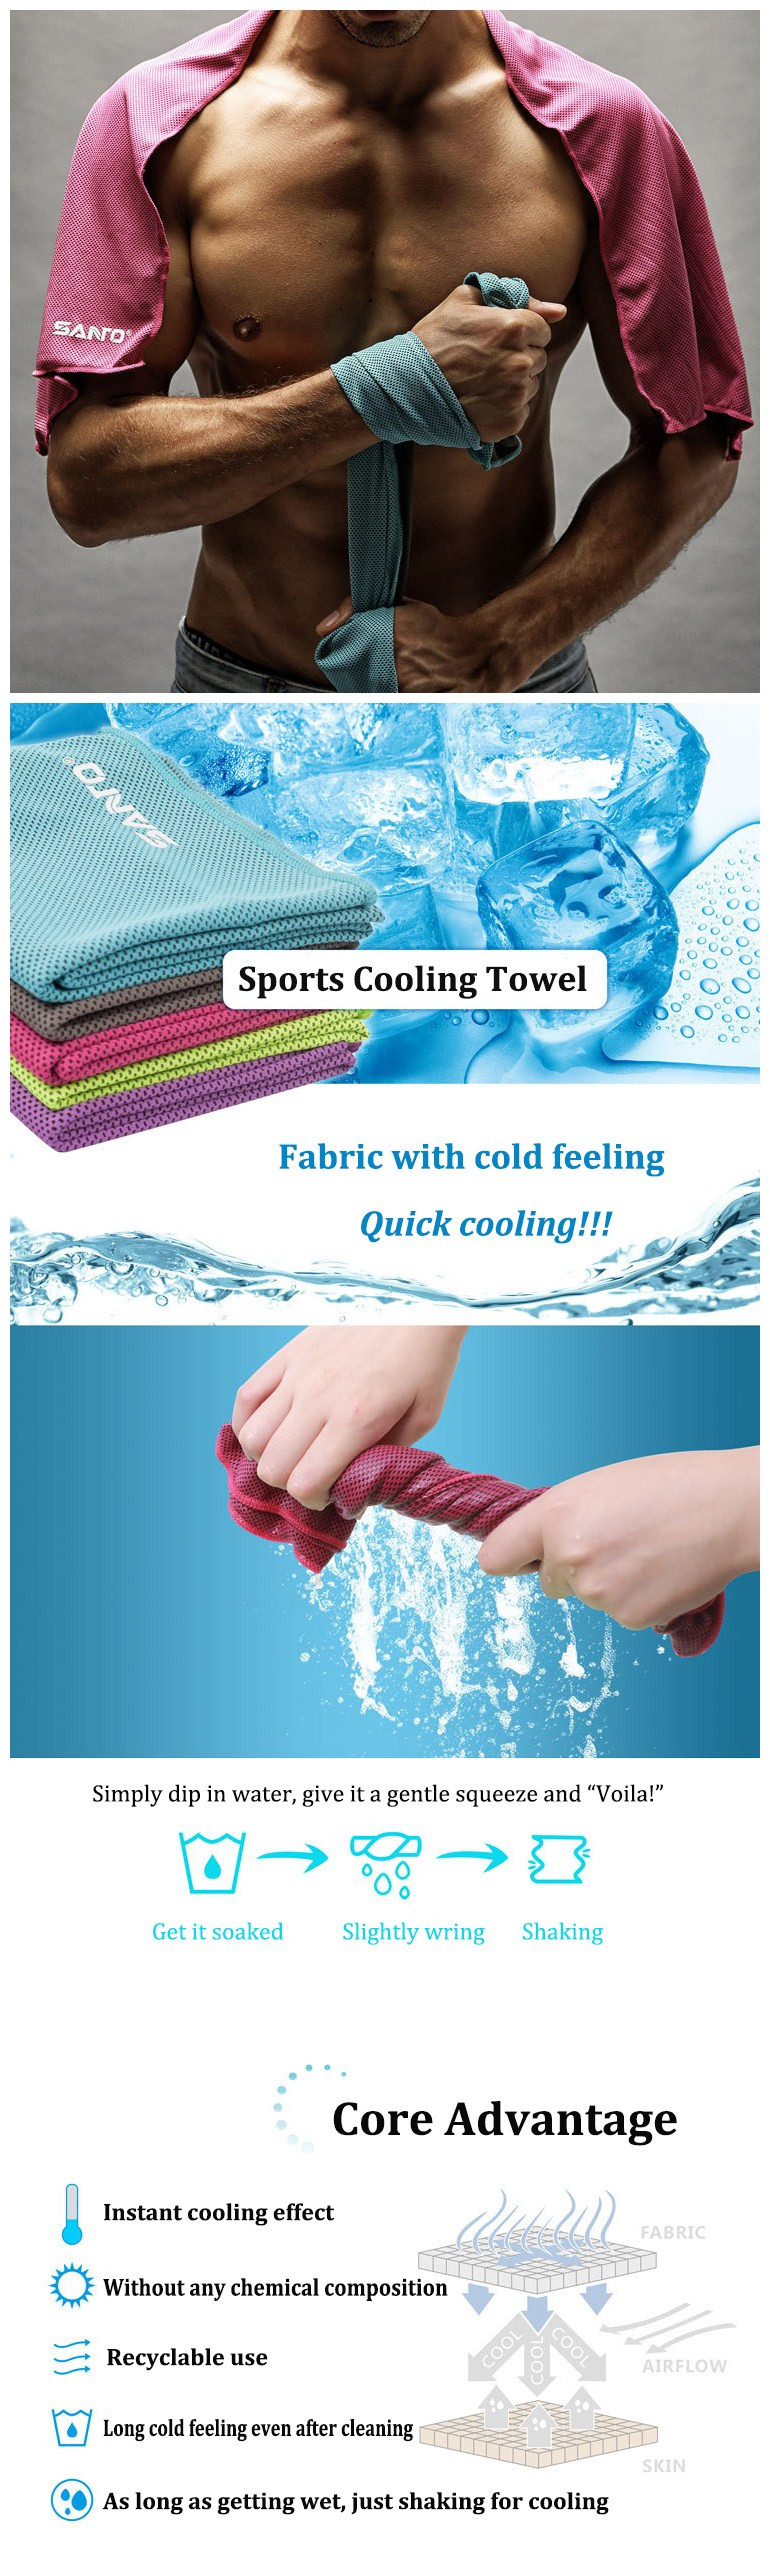 IPRee-Sports-Cooling-Cold-Towel-Summer-Sweat-Absorbent-Towel-Quick-Dry-Washcloth-For-Gym-Running-Yog-1082791